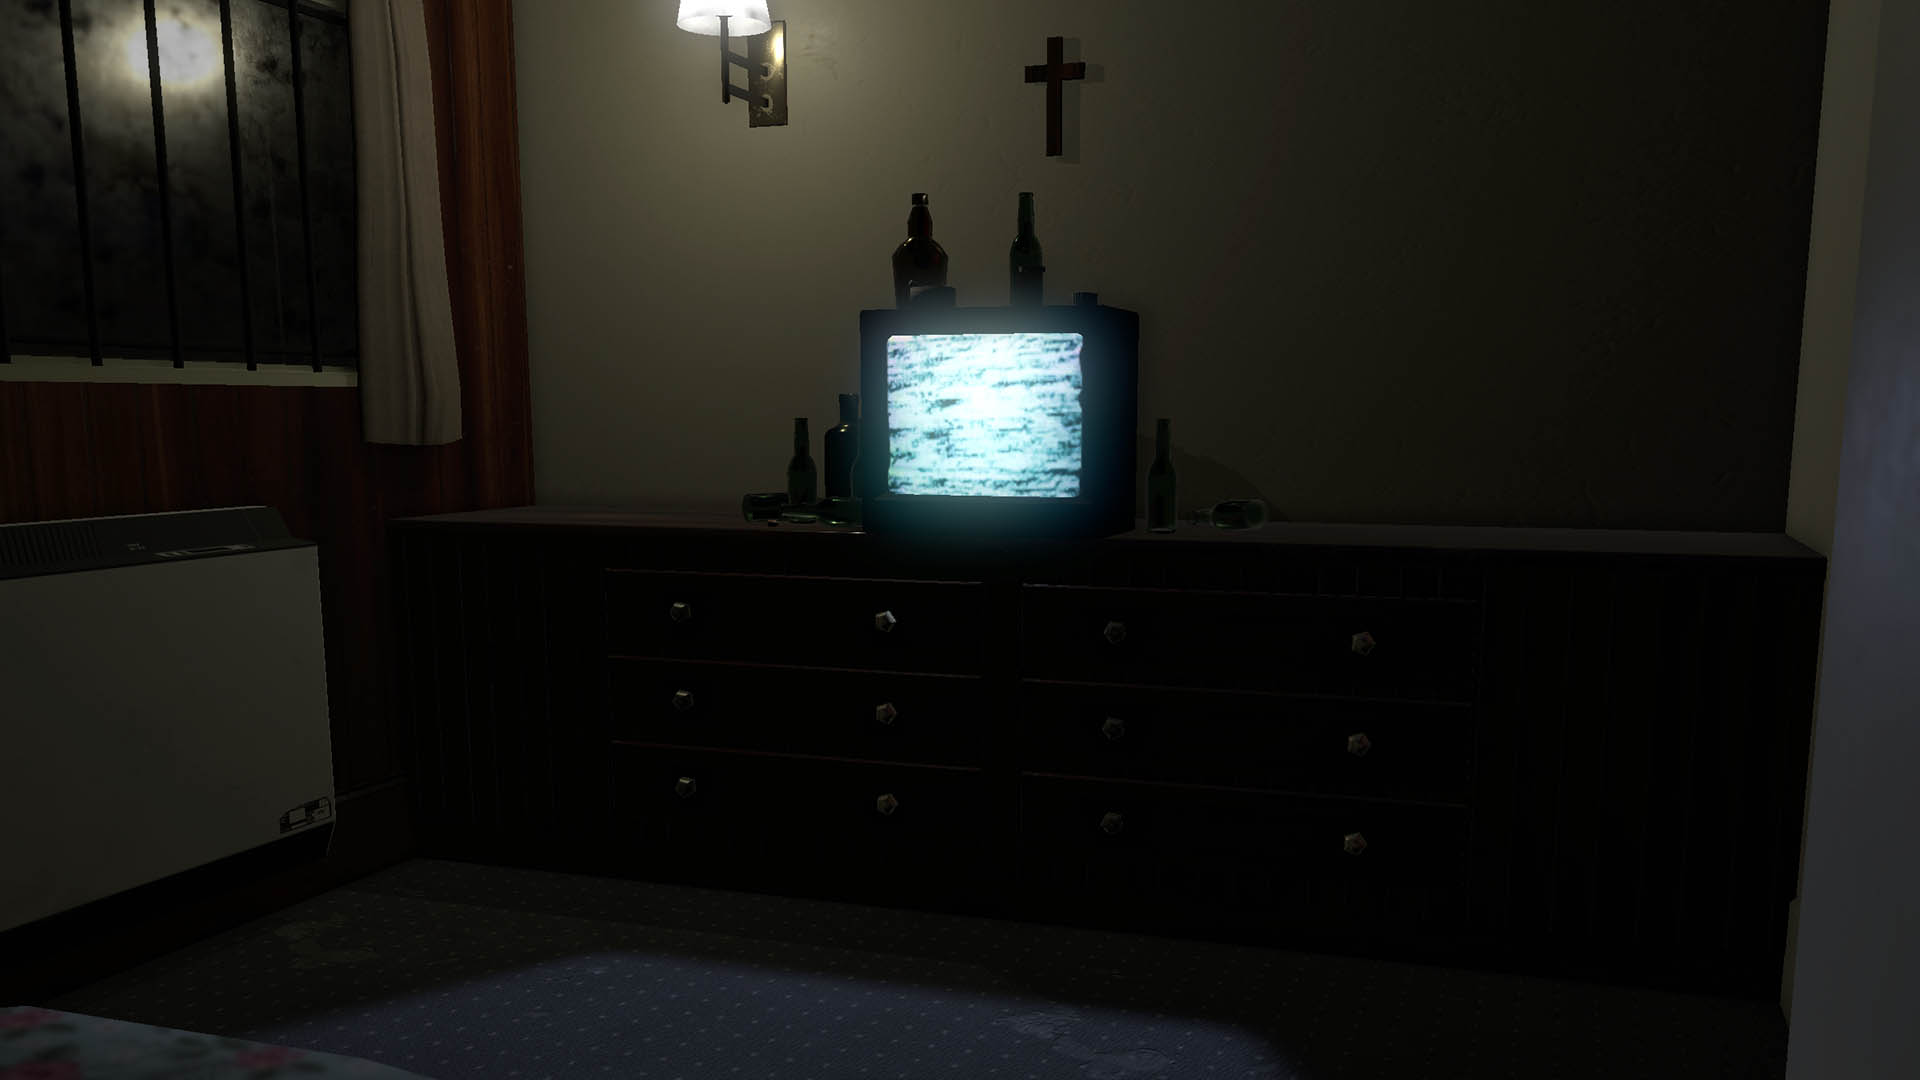 A Chair in a Room : Greenwater screenshot